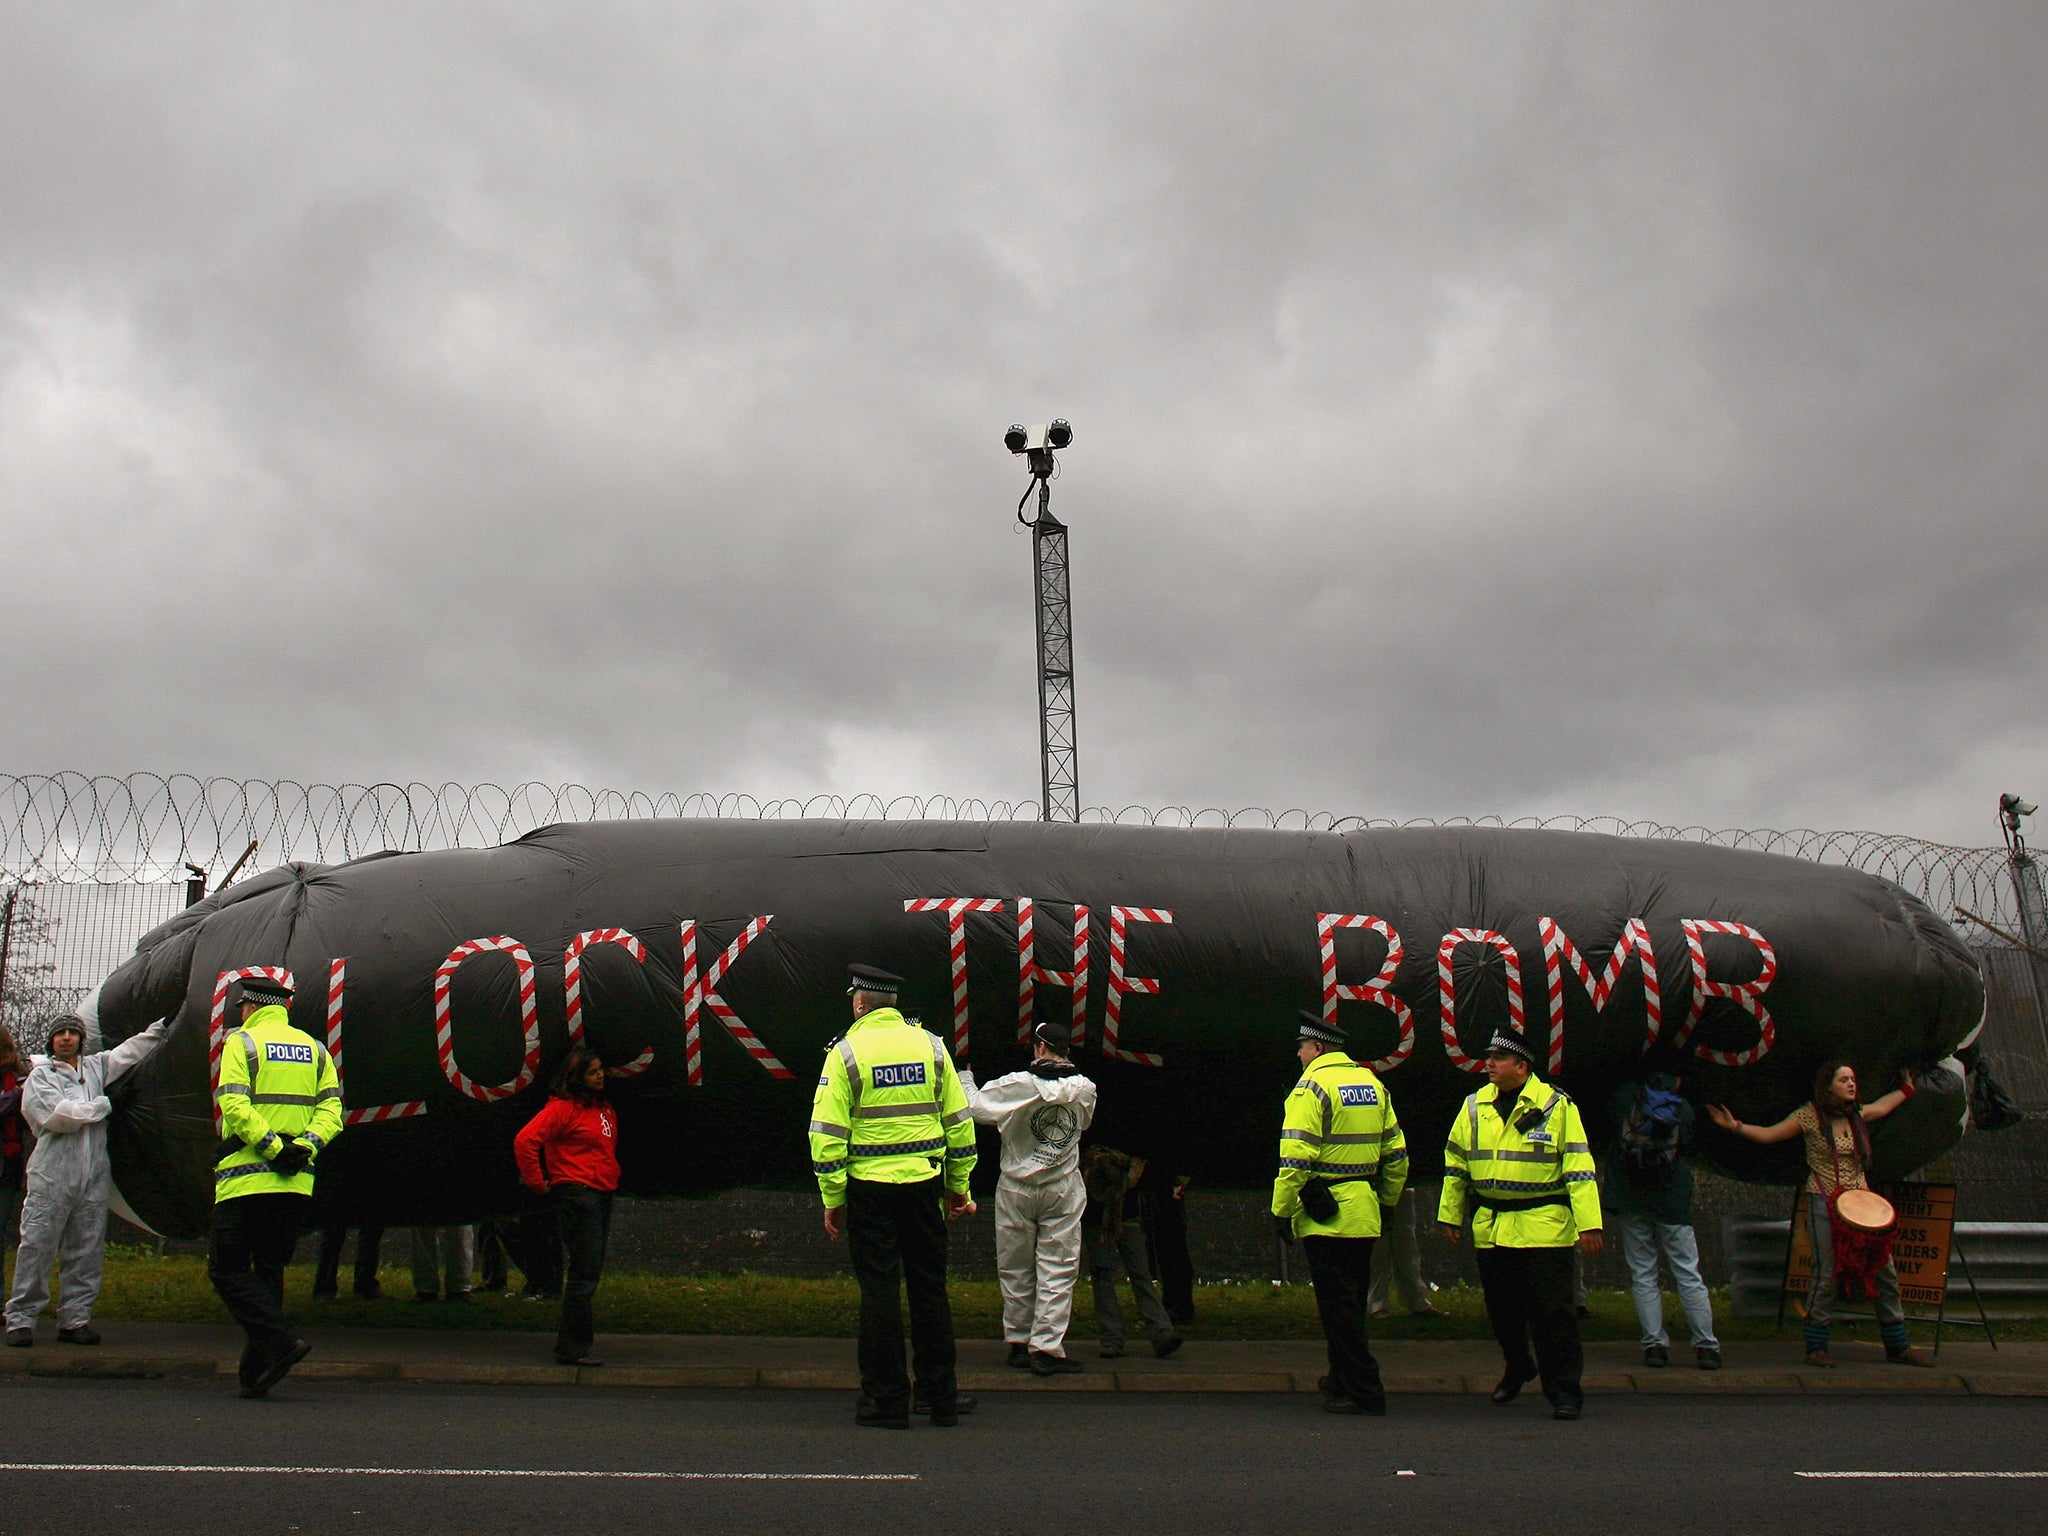 Campaigners protest at the Faslane naval base on the Clyde, home of the Trident Submarine fleet, in March 2007